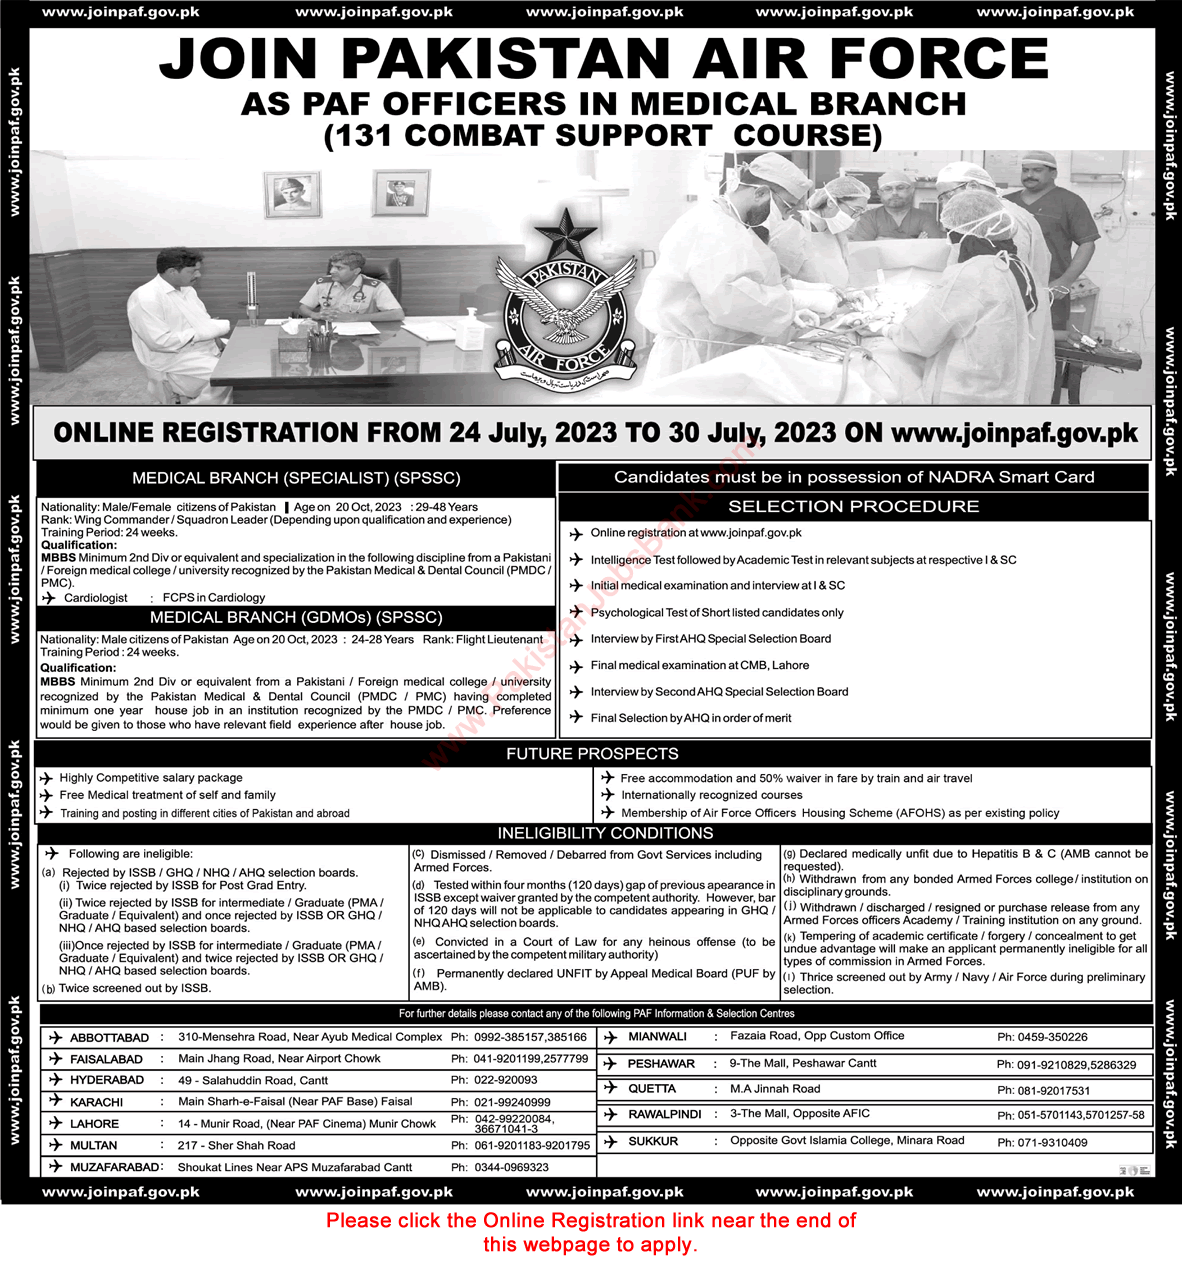 Join Pakistan Air Force as PAF Officers in Medical Branch 2023 July Online Registration SPSSC 131 Combat Support Course Latest